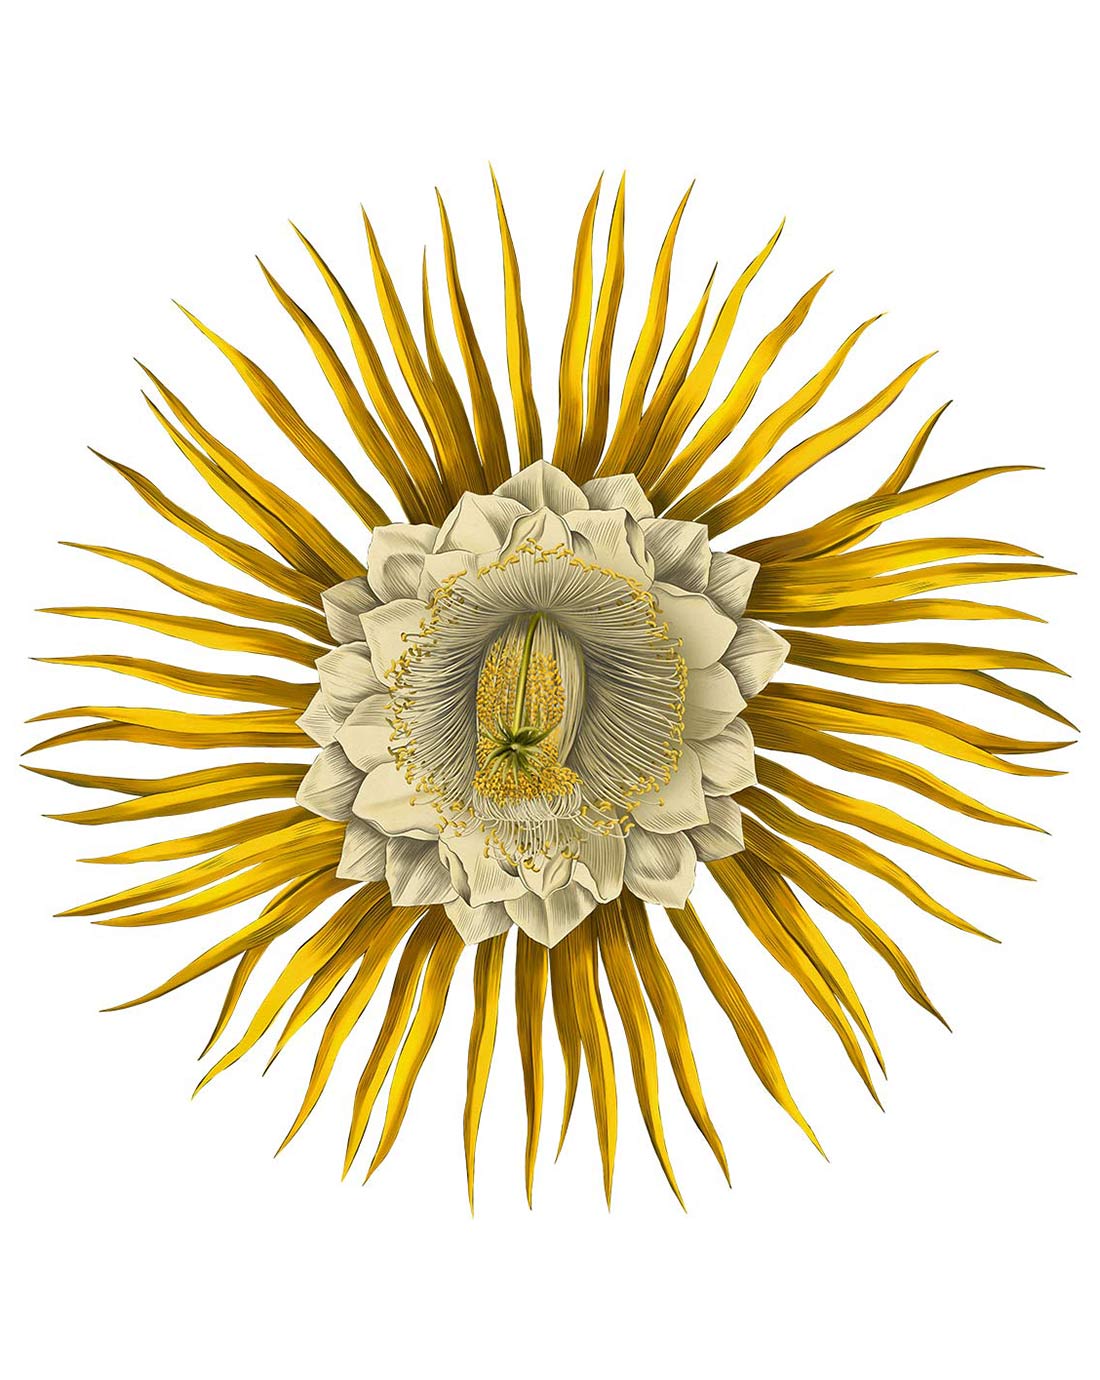 Cereus flower study from our Ellis Editions